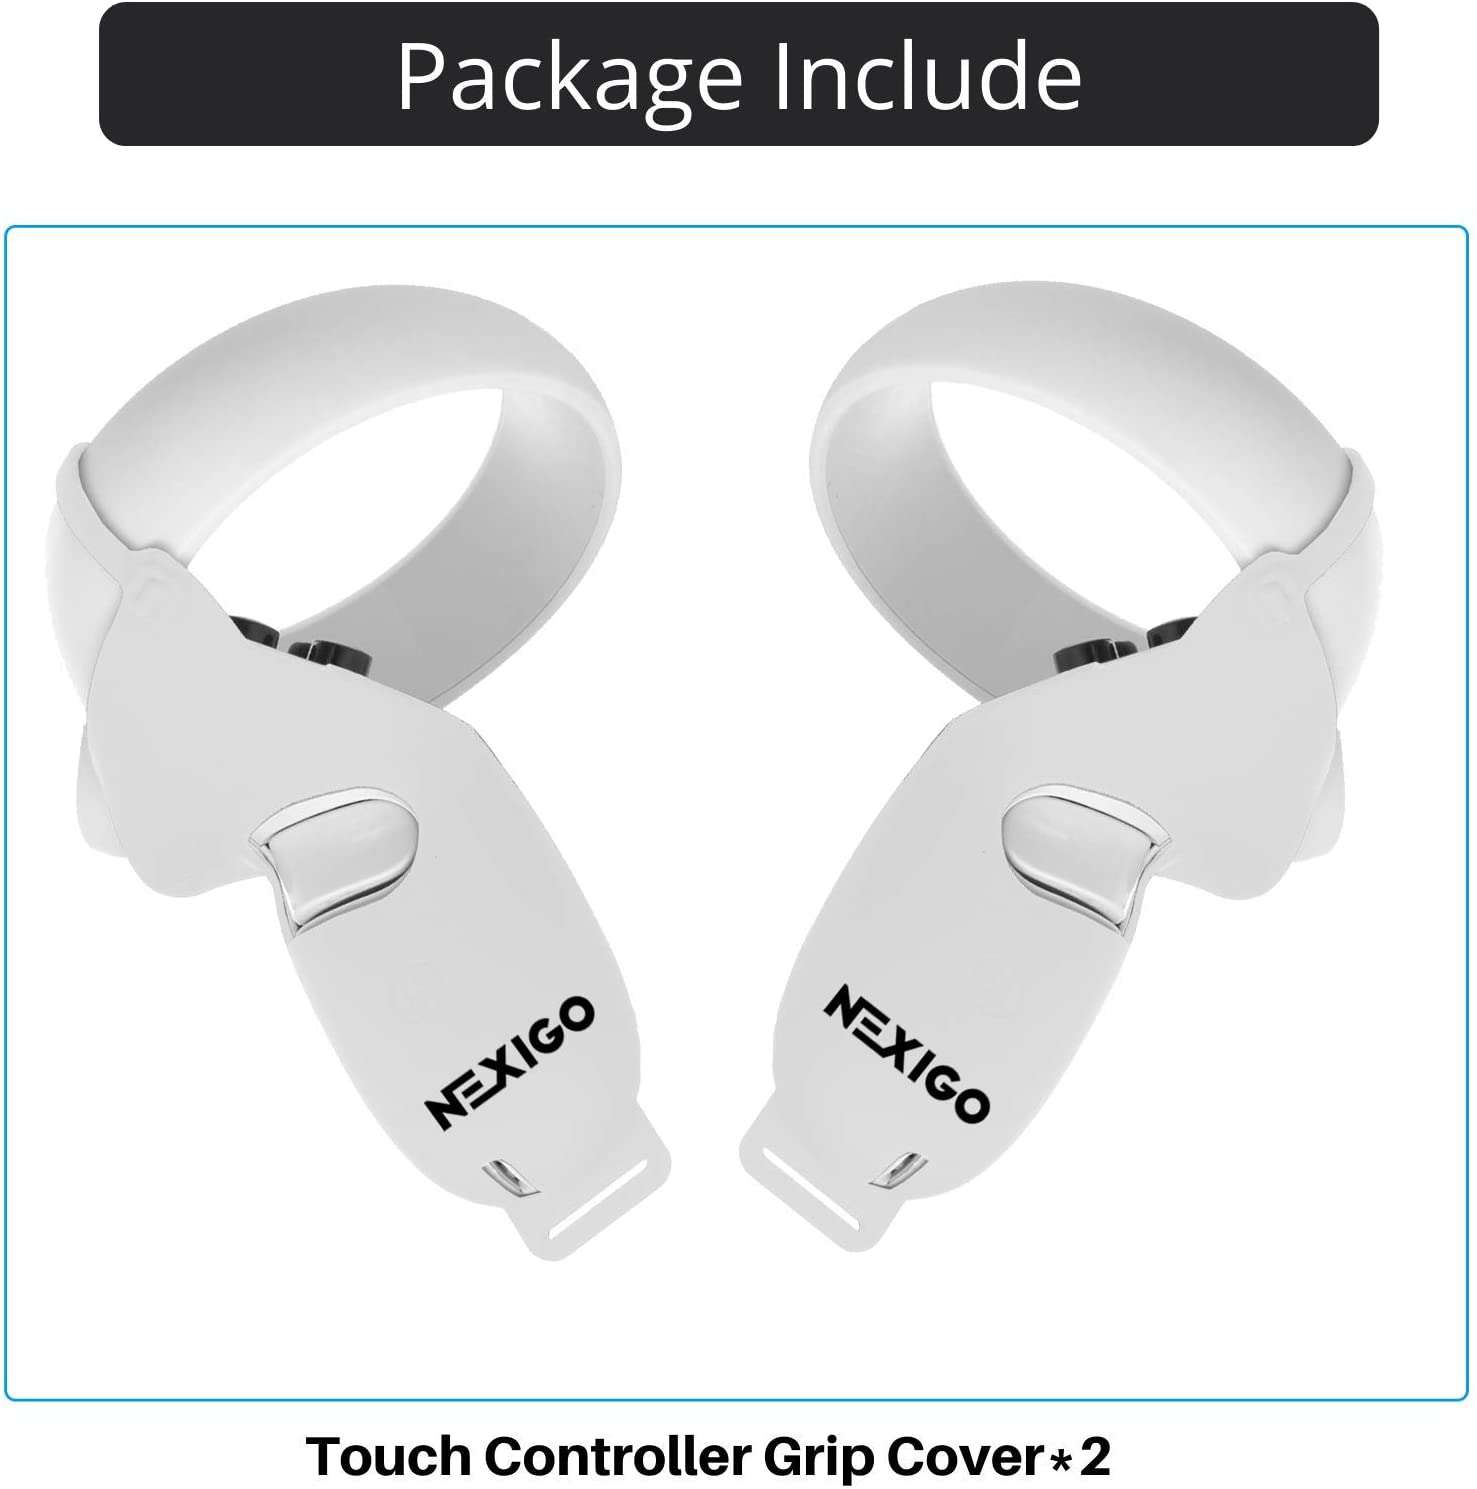 The package includes 2 Touch Controller Grip Covers.